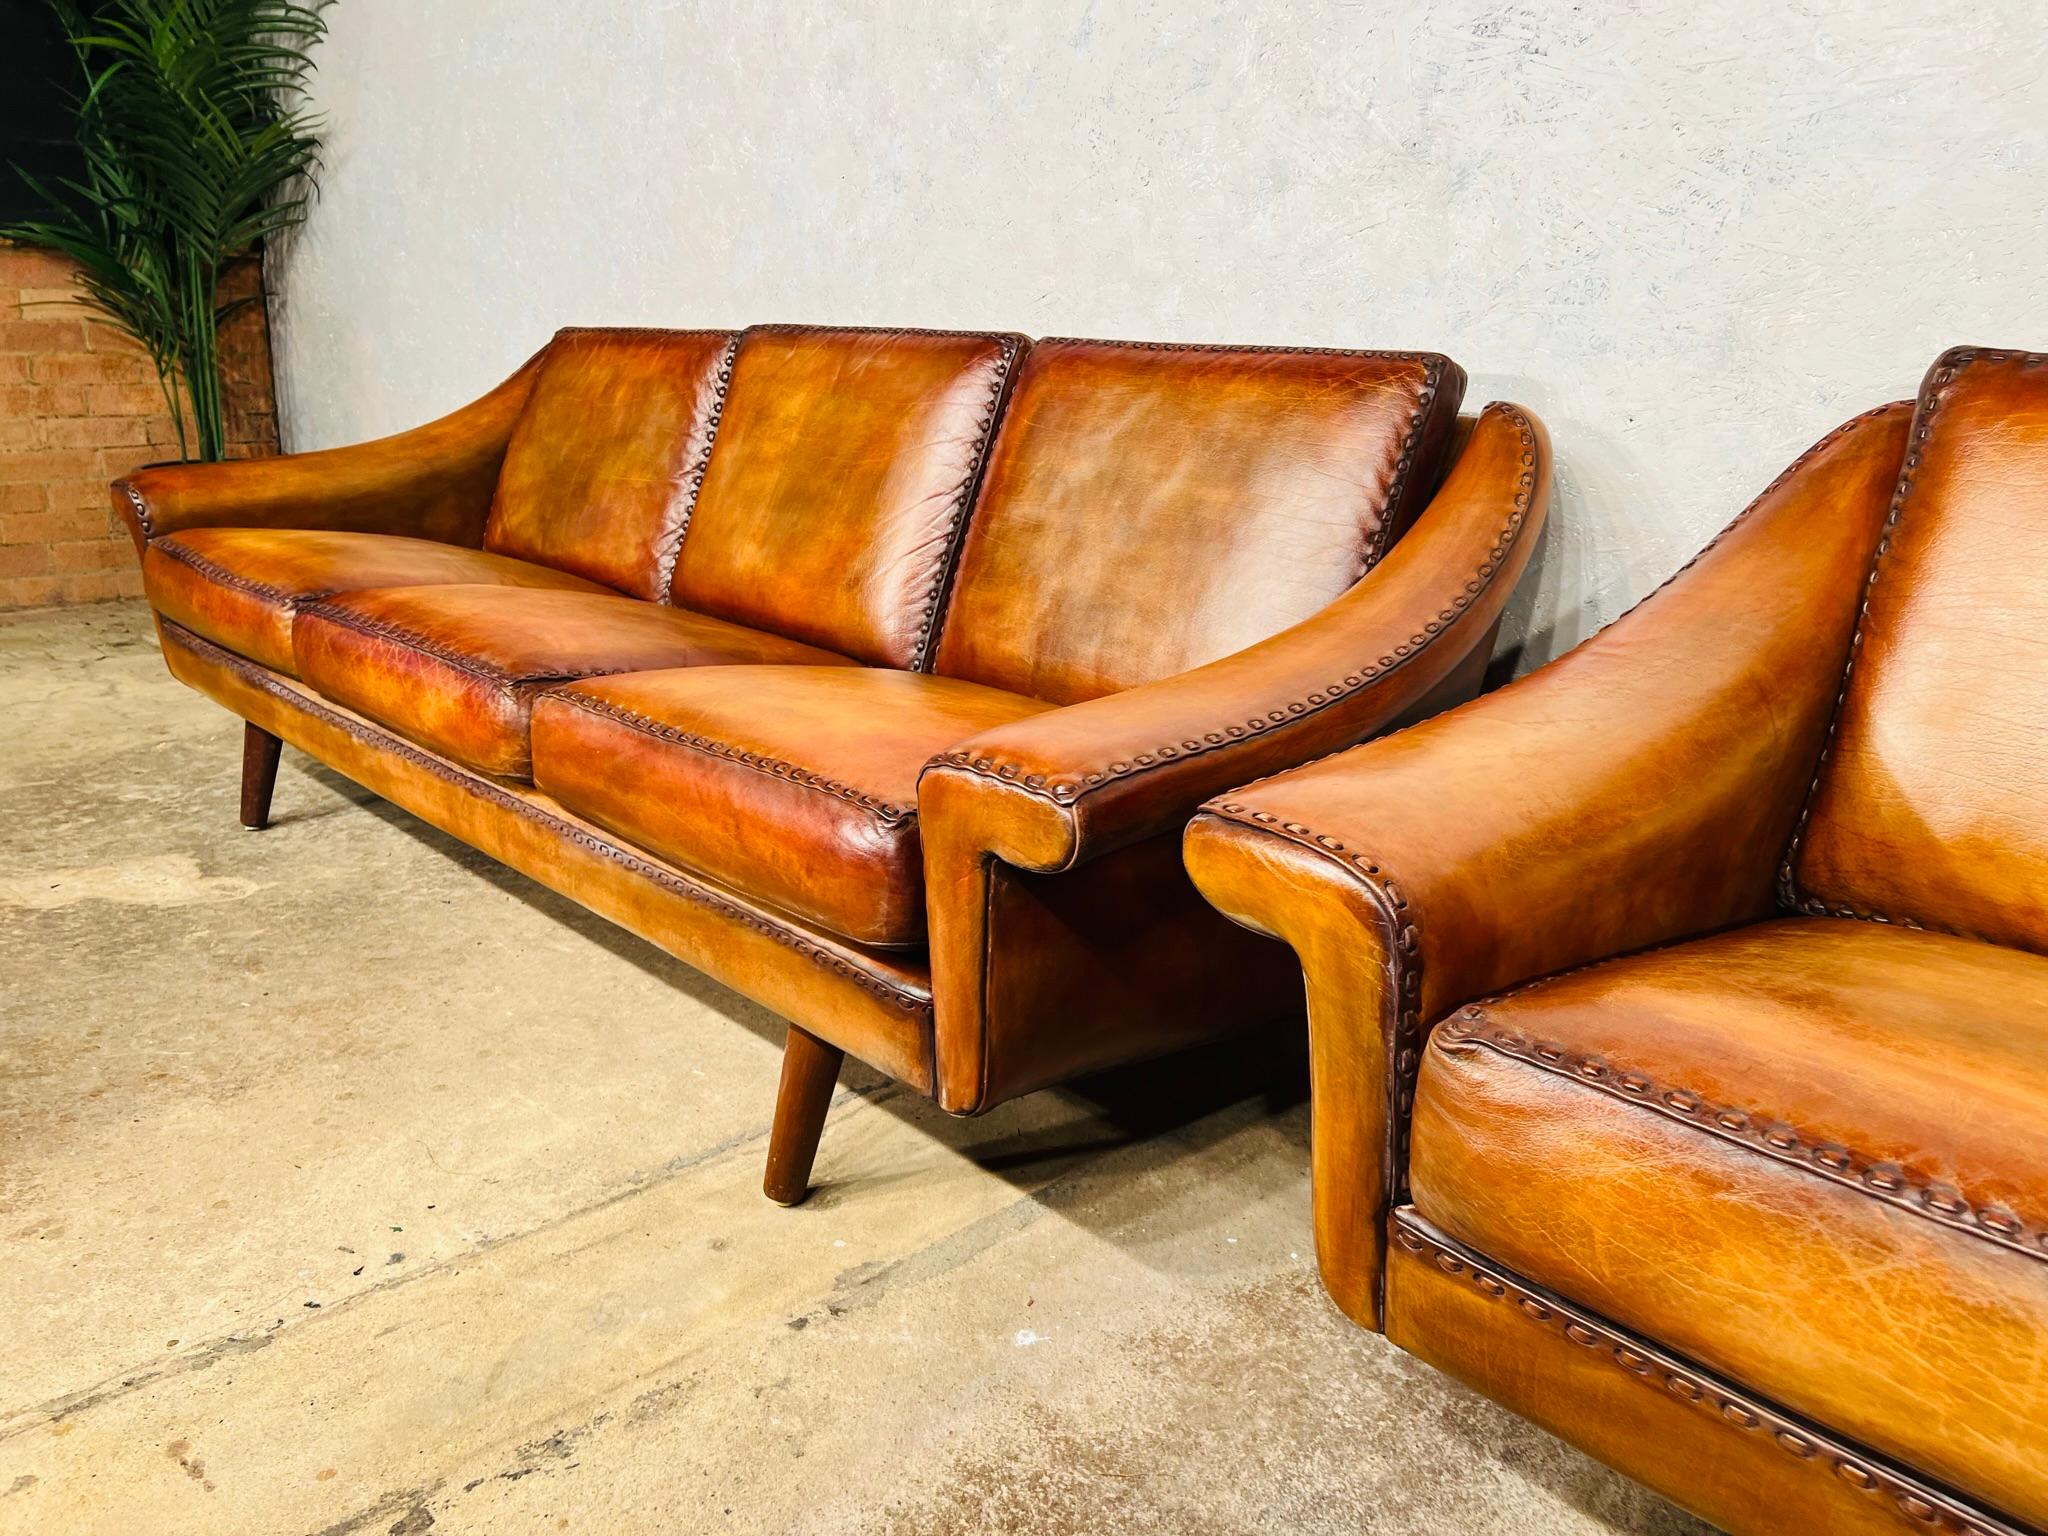 Pair Of Matador Leather 3 Seater Sofa by Aage Christiansen for Eran 1960s #642 For Sale 8